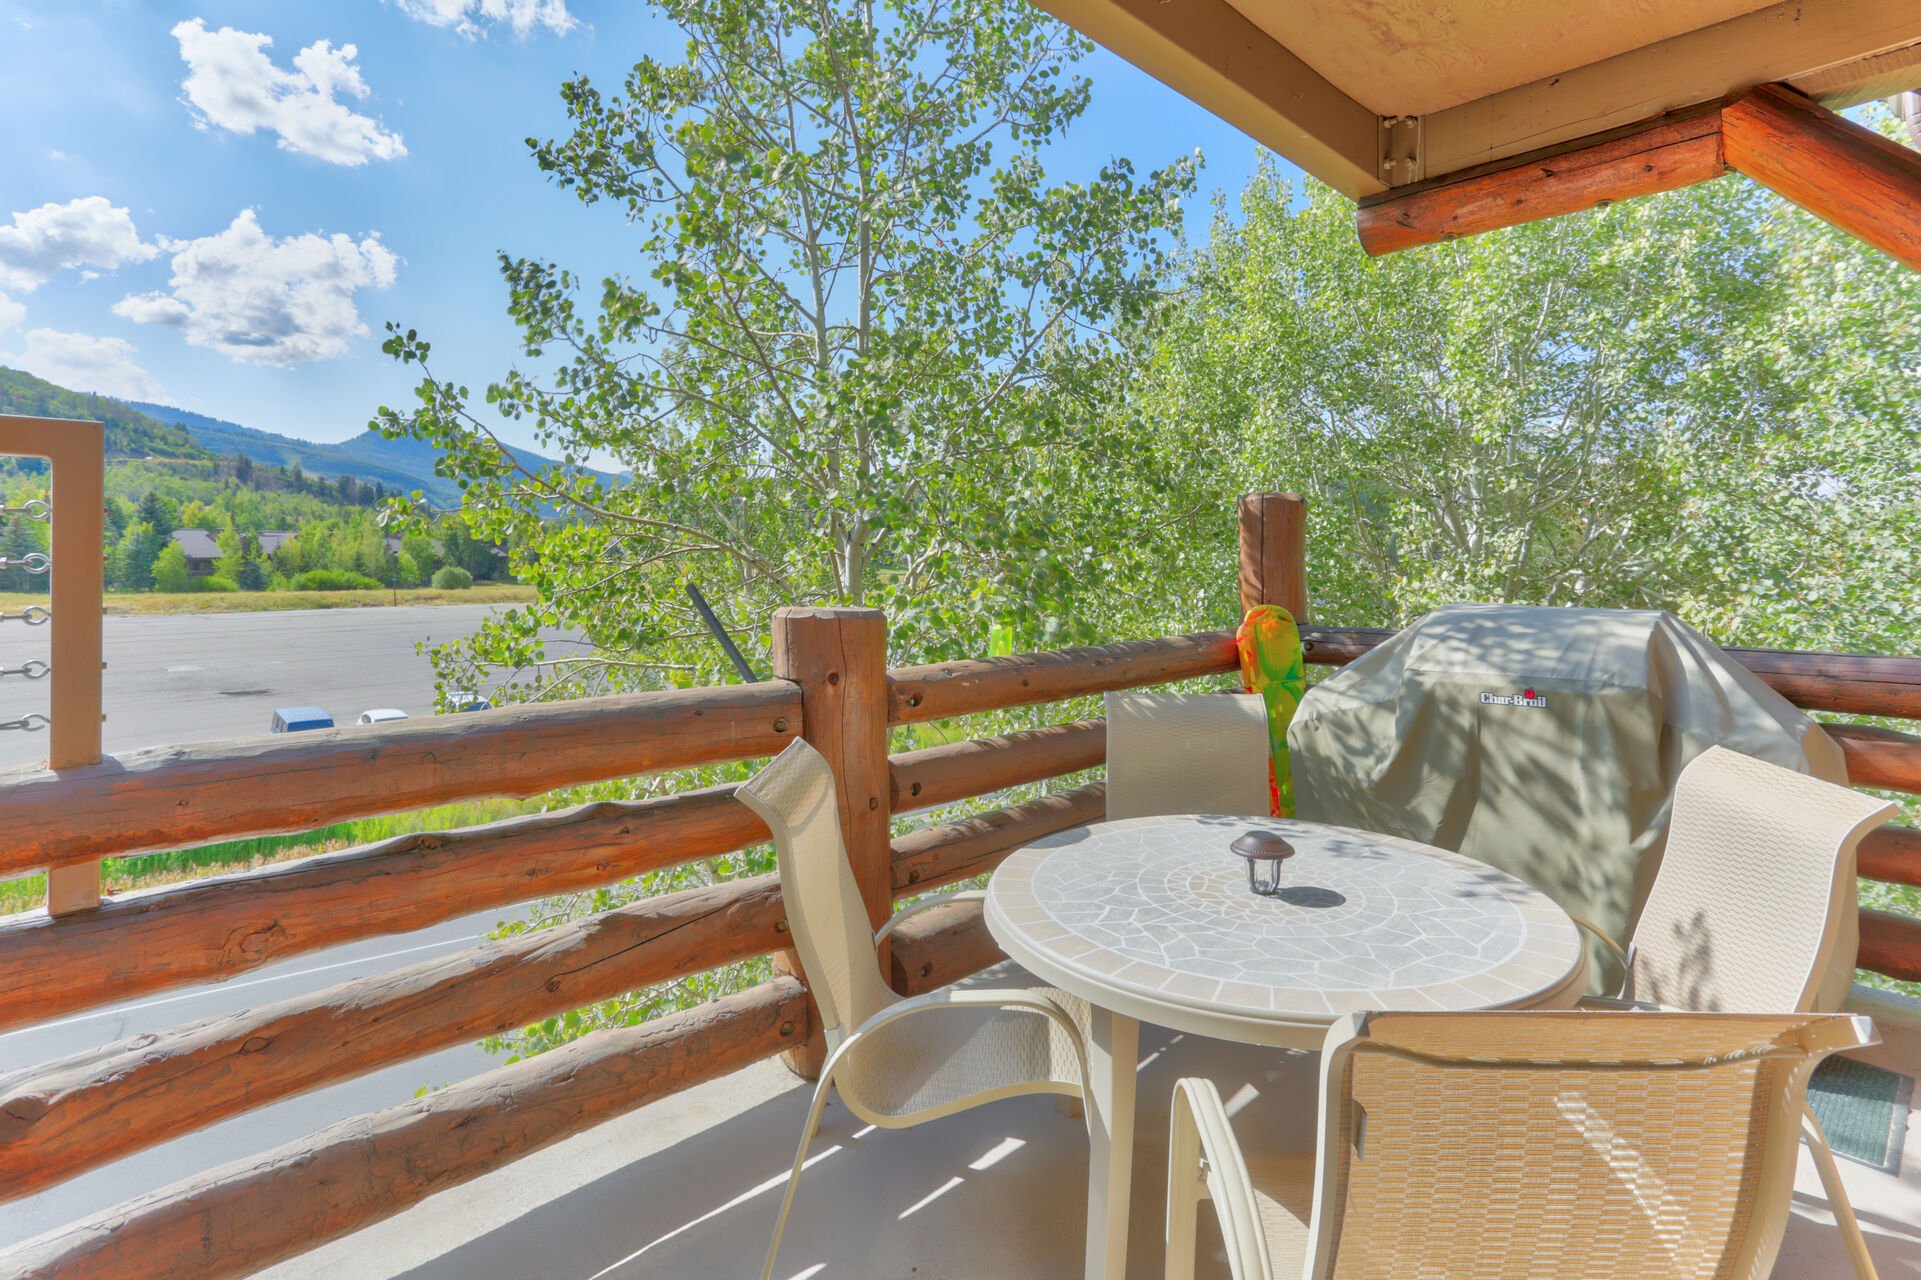 BBQ and Patio Seating with Mountain Views from the Private Deck